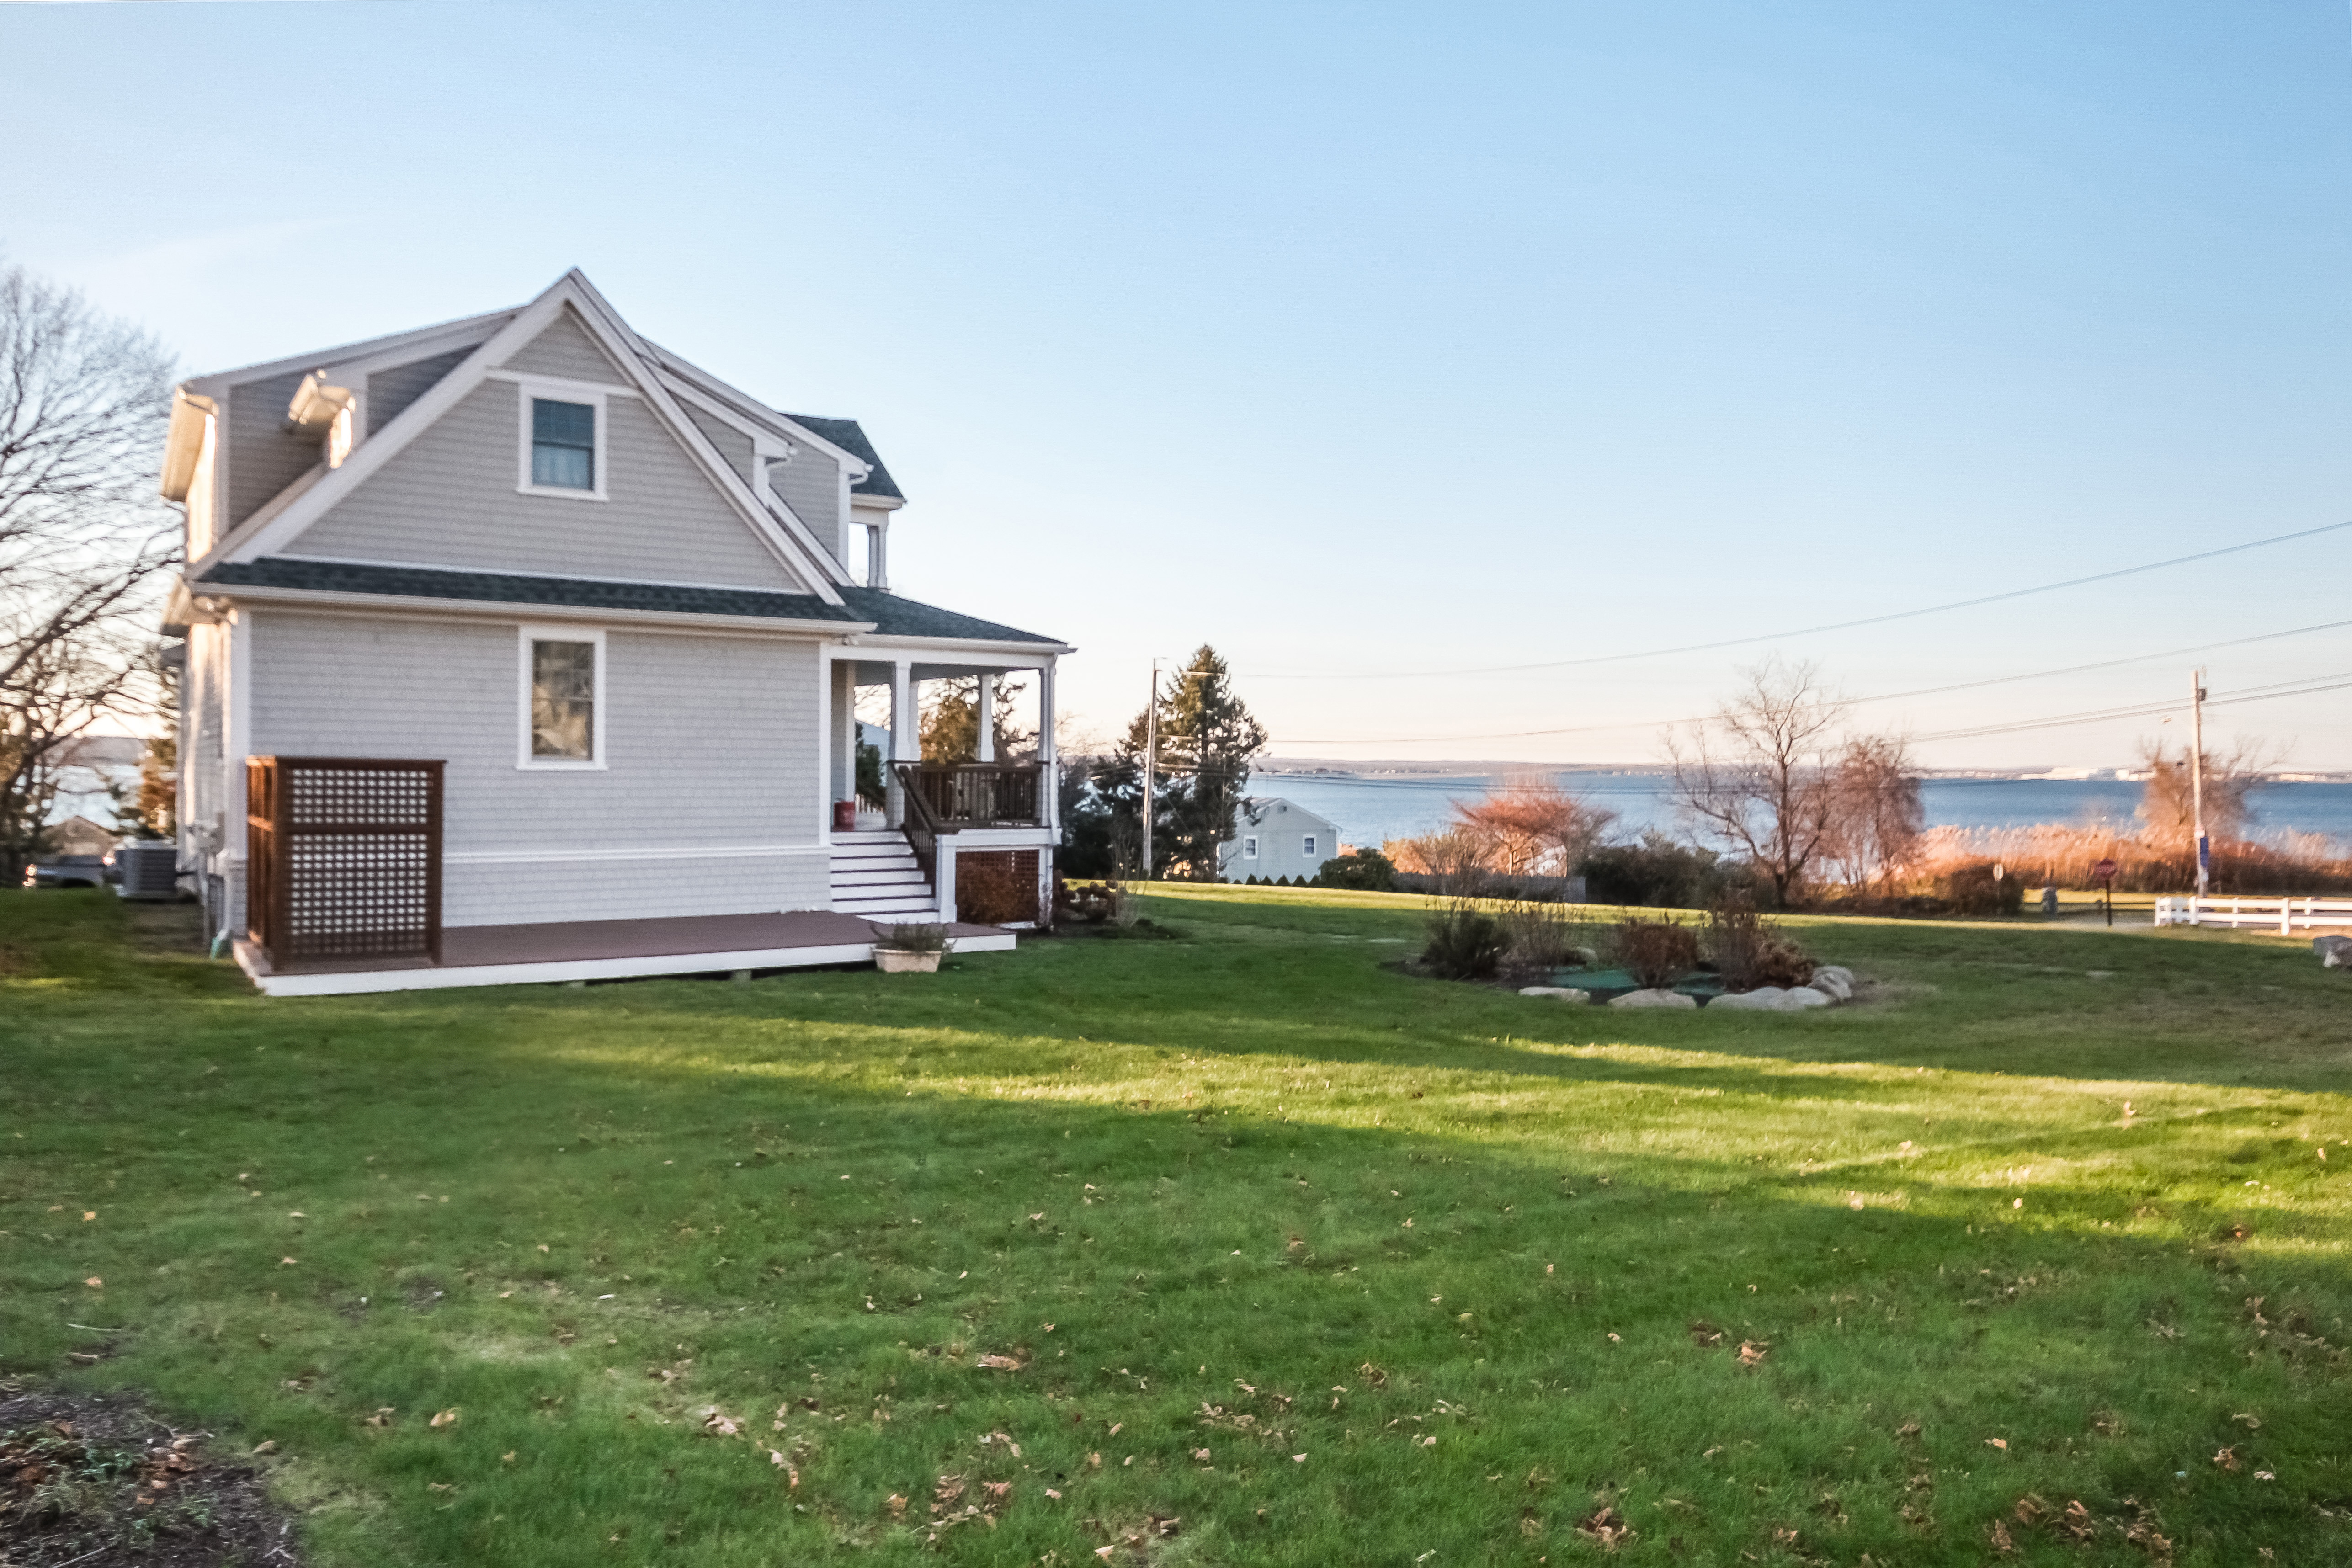 Waterview Home in Jamestown Shores Sells for $1.06M